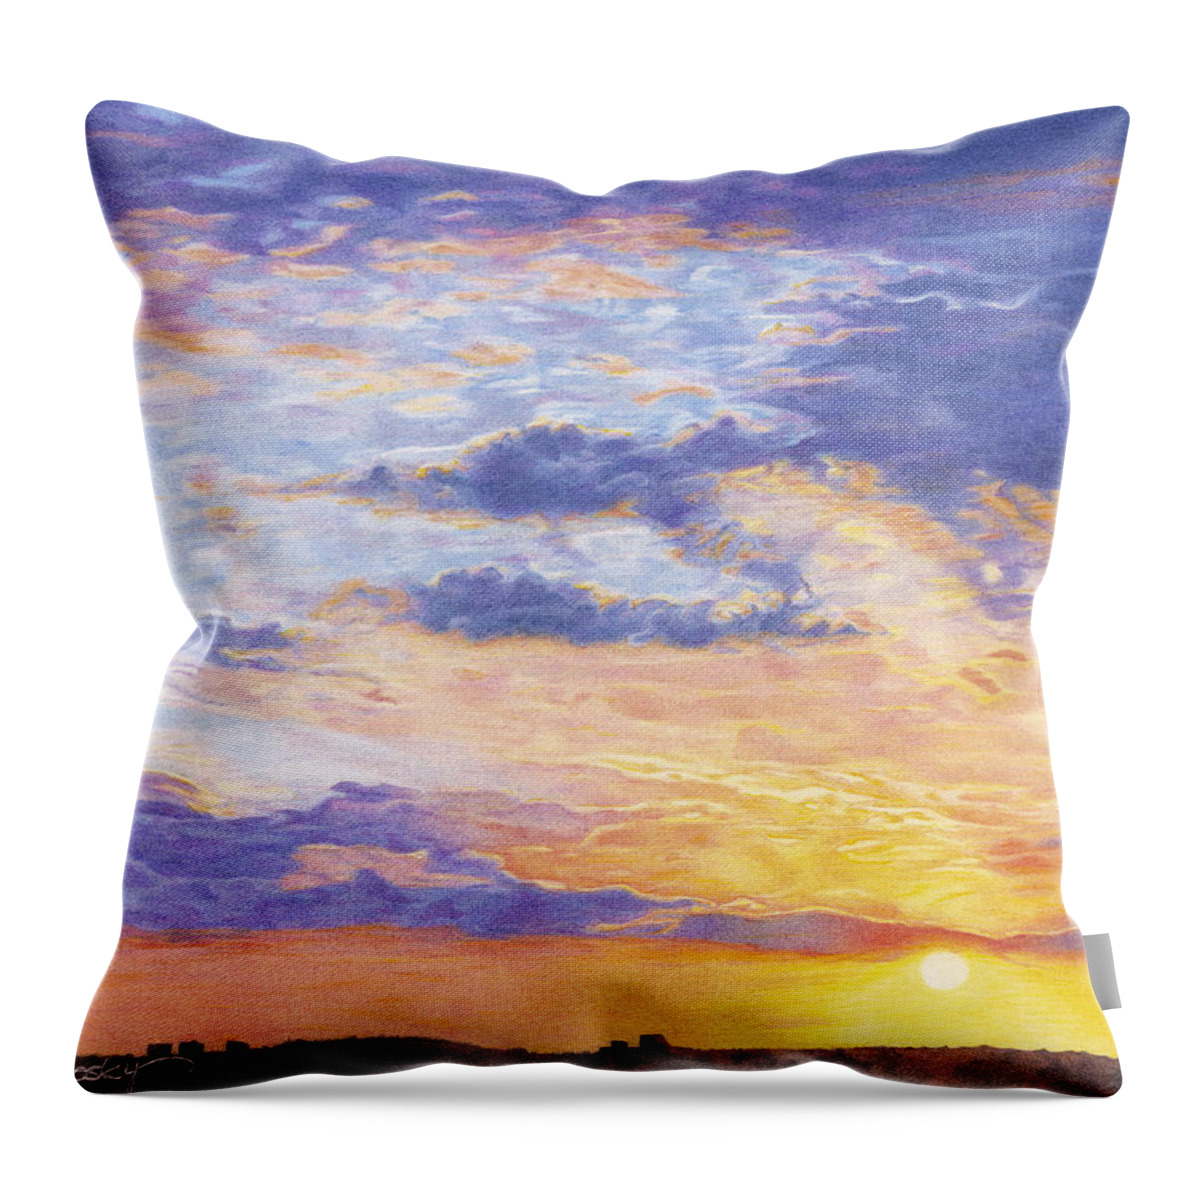 Desert Throw Pillow featuring the drawing Evening Sky by Diana Hrabosky